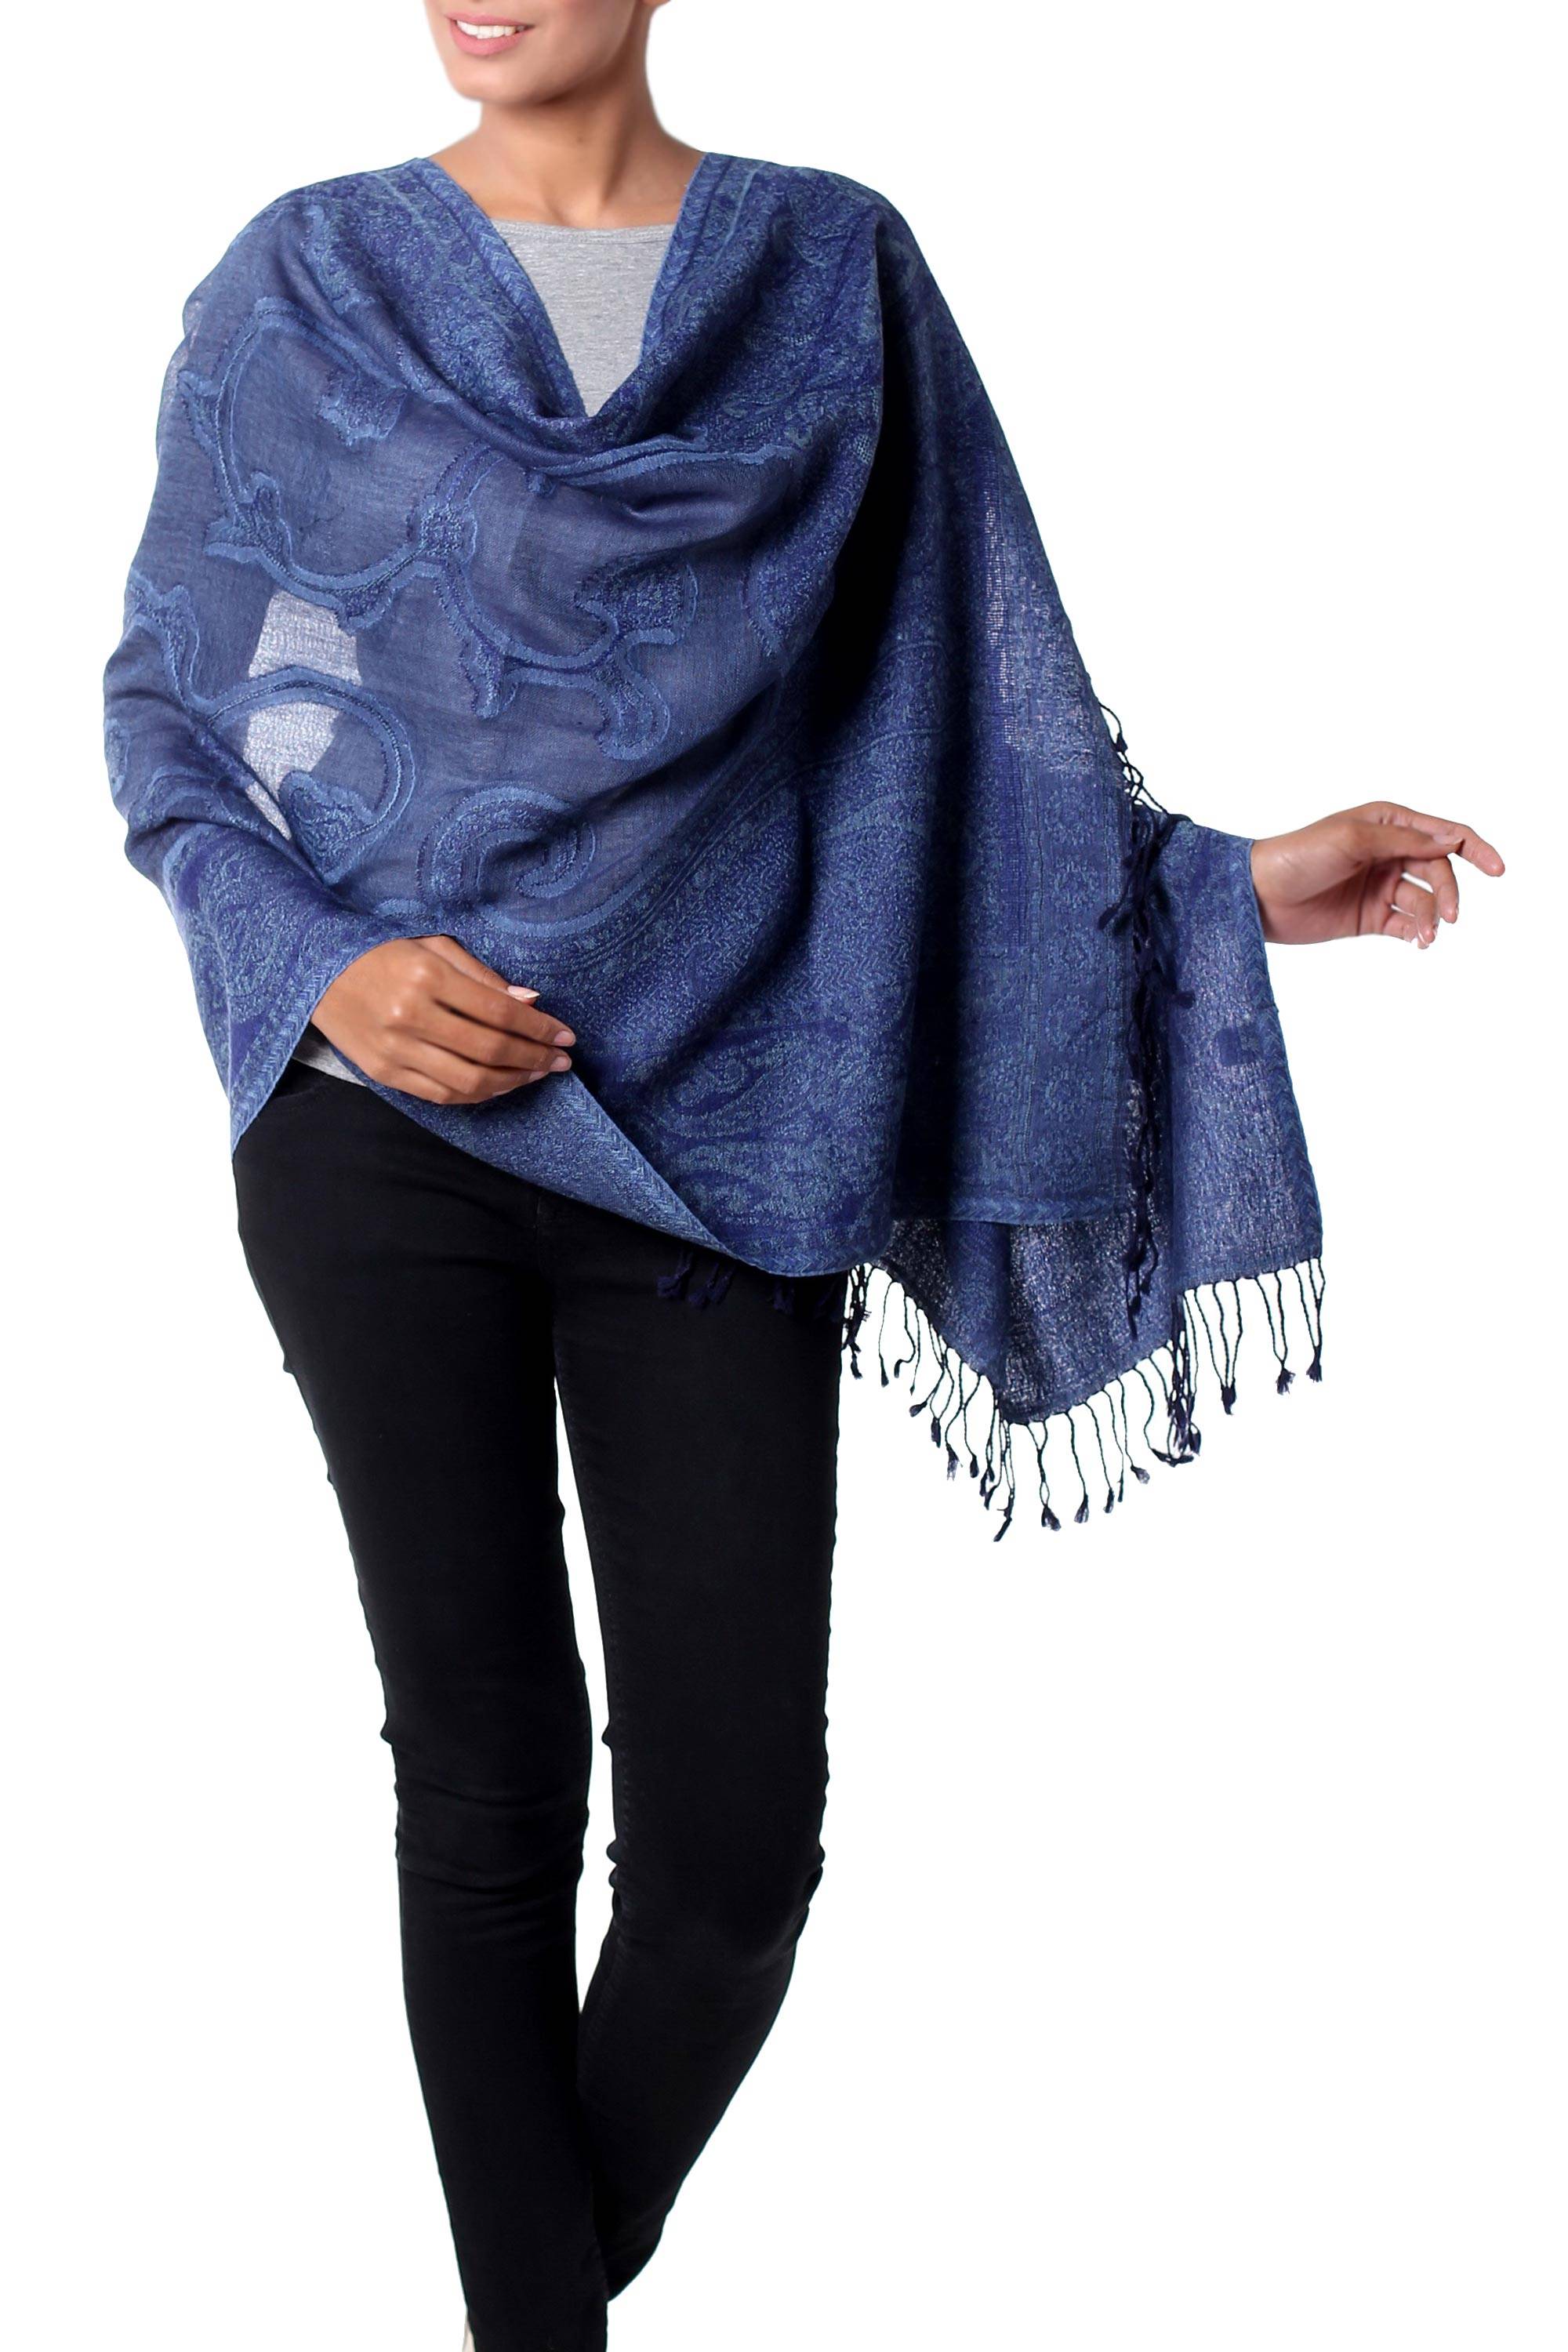 Jamawar Style Blue Paisley Wool Shawl from India - Glorious Blue ...